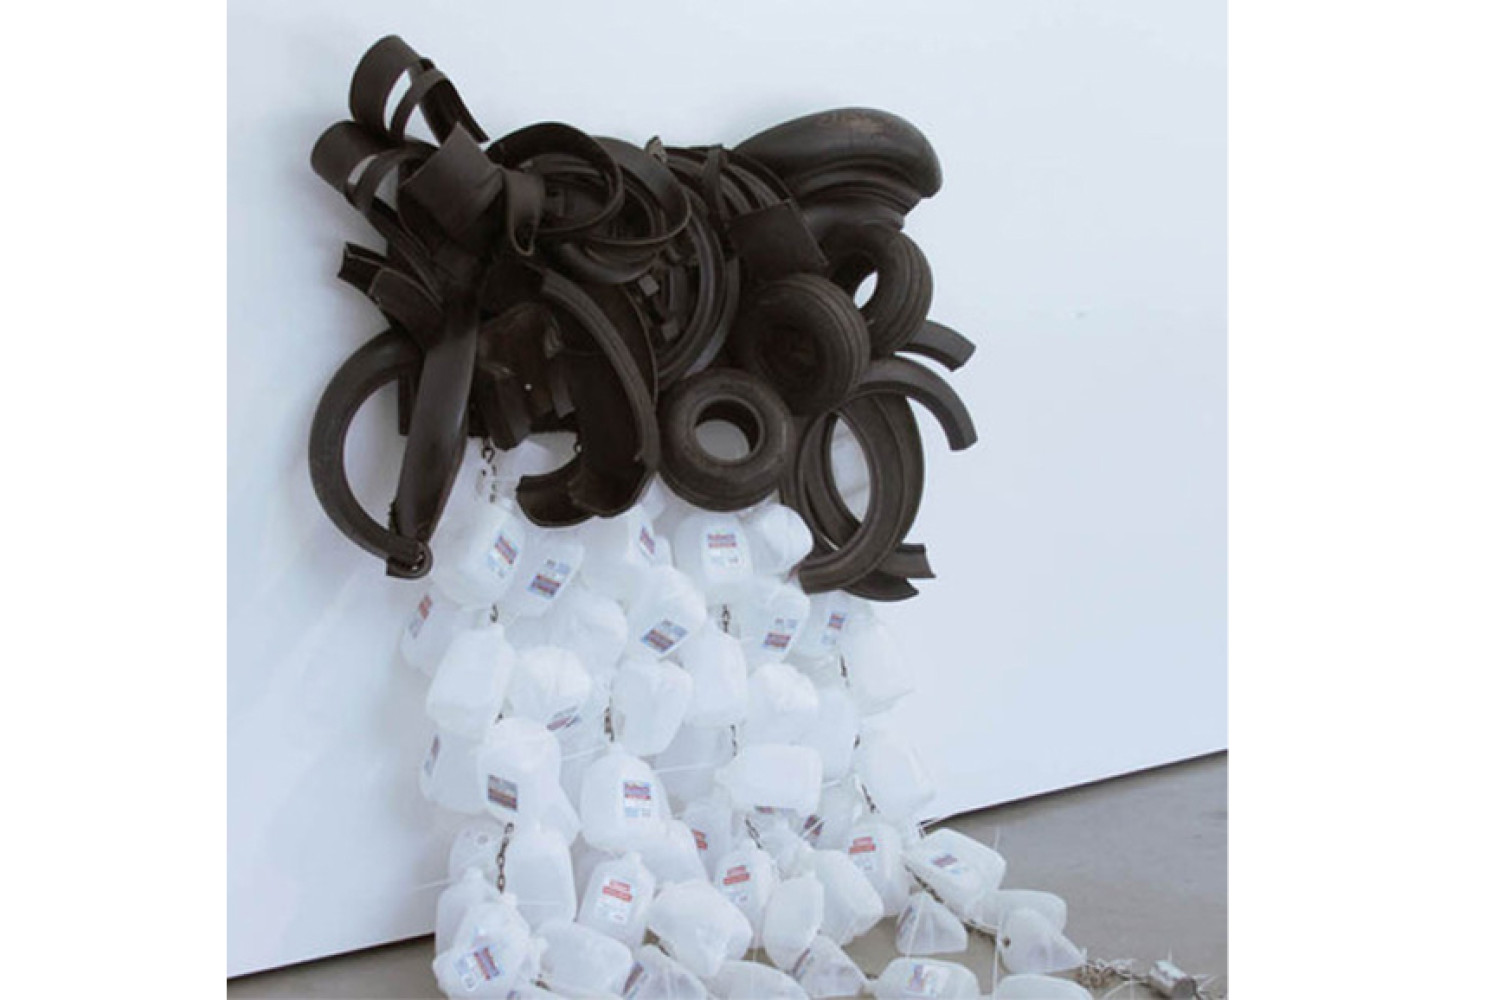 OVER, the rainbow, 2012, by Chakaia Booker (American, b. 1953); Rubber,
wood, and mixed media, 60 x 60 x 24 inches; Image courtesy
of the artist; © Chakaia Booker.